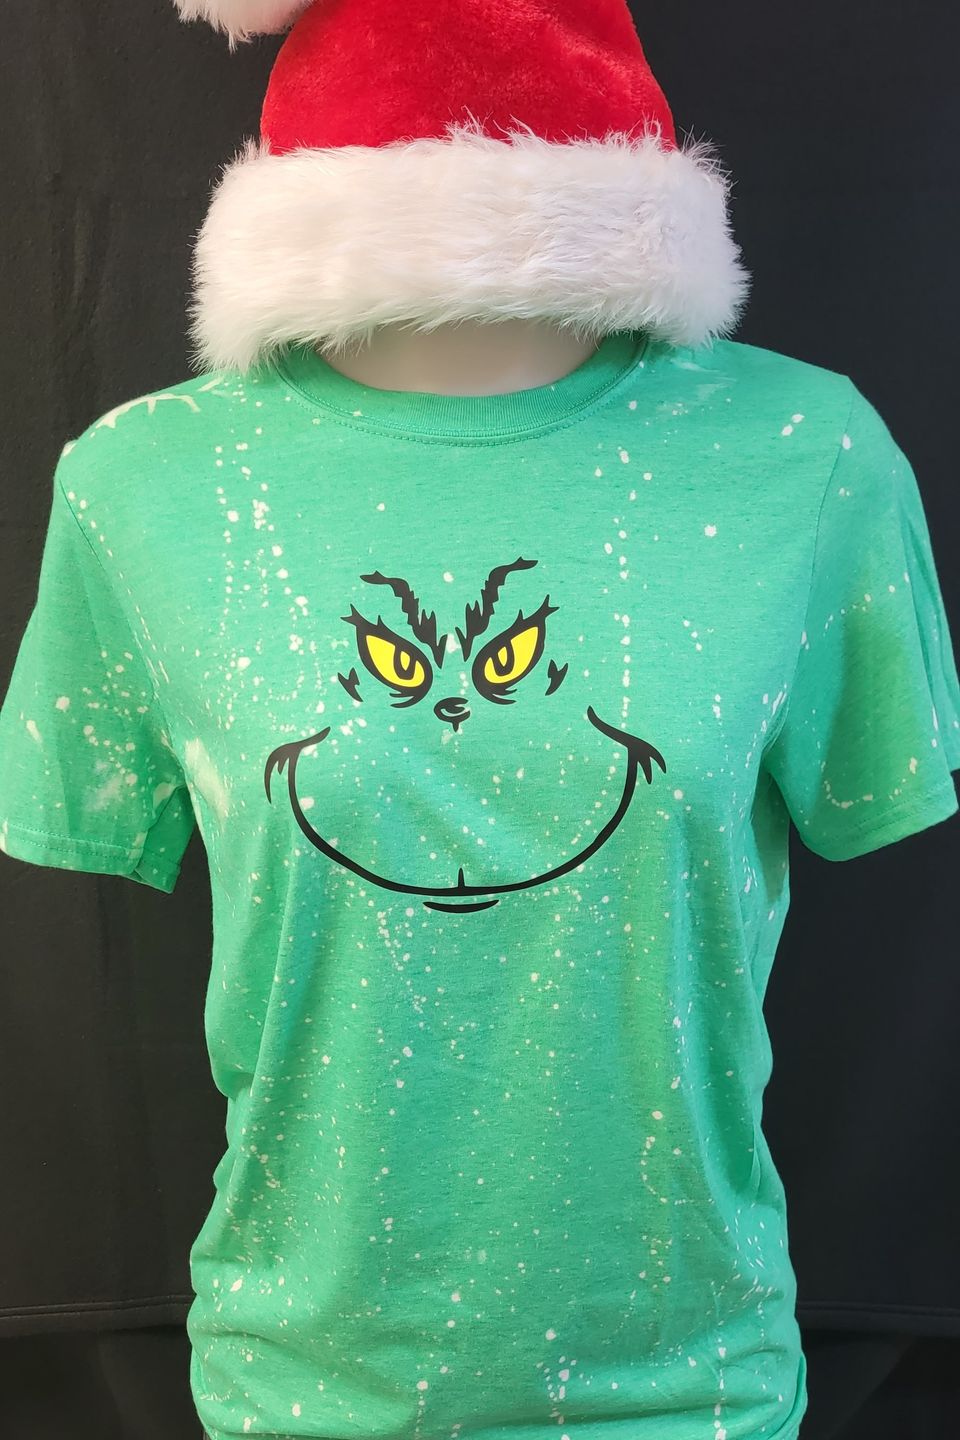 "DTF Direct-to-Film" example - The Grinch holiday design on a green t-shirt